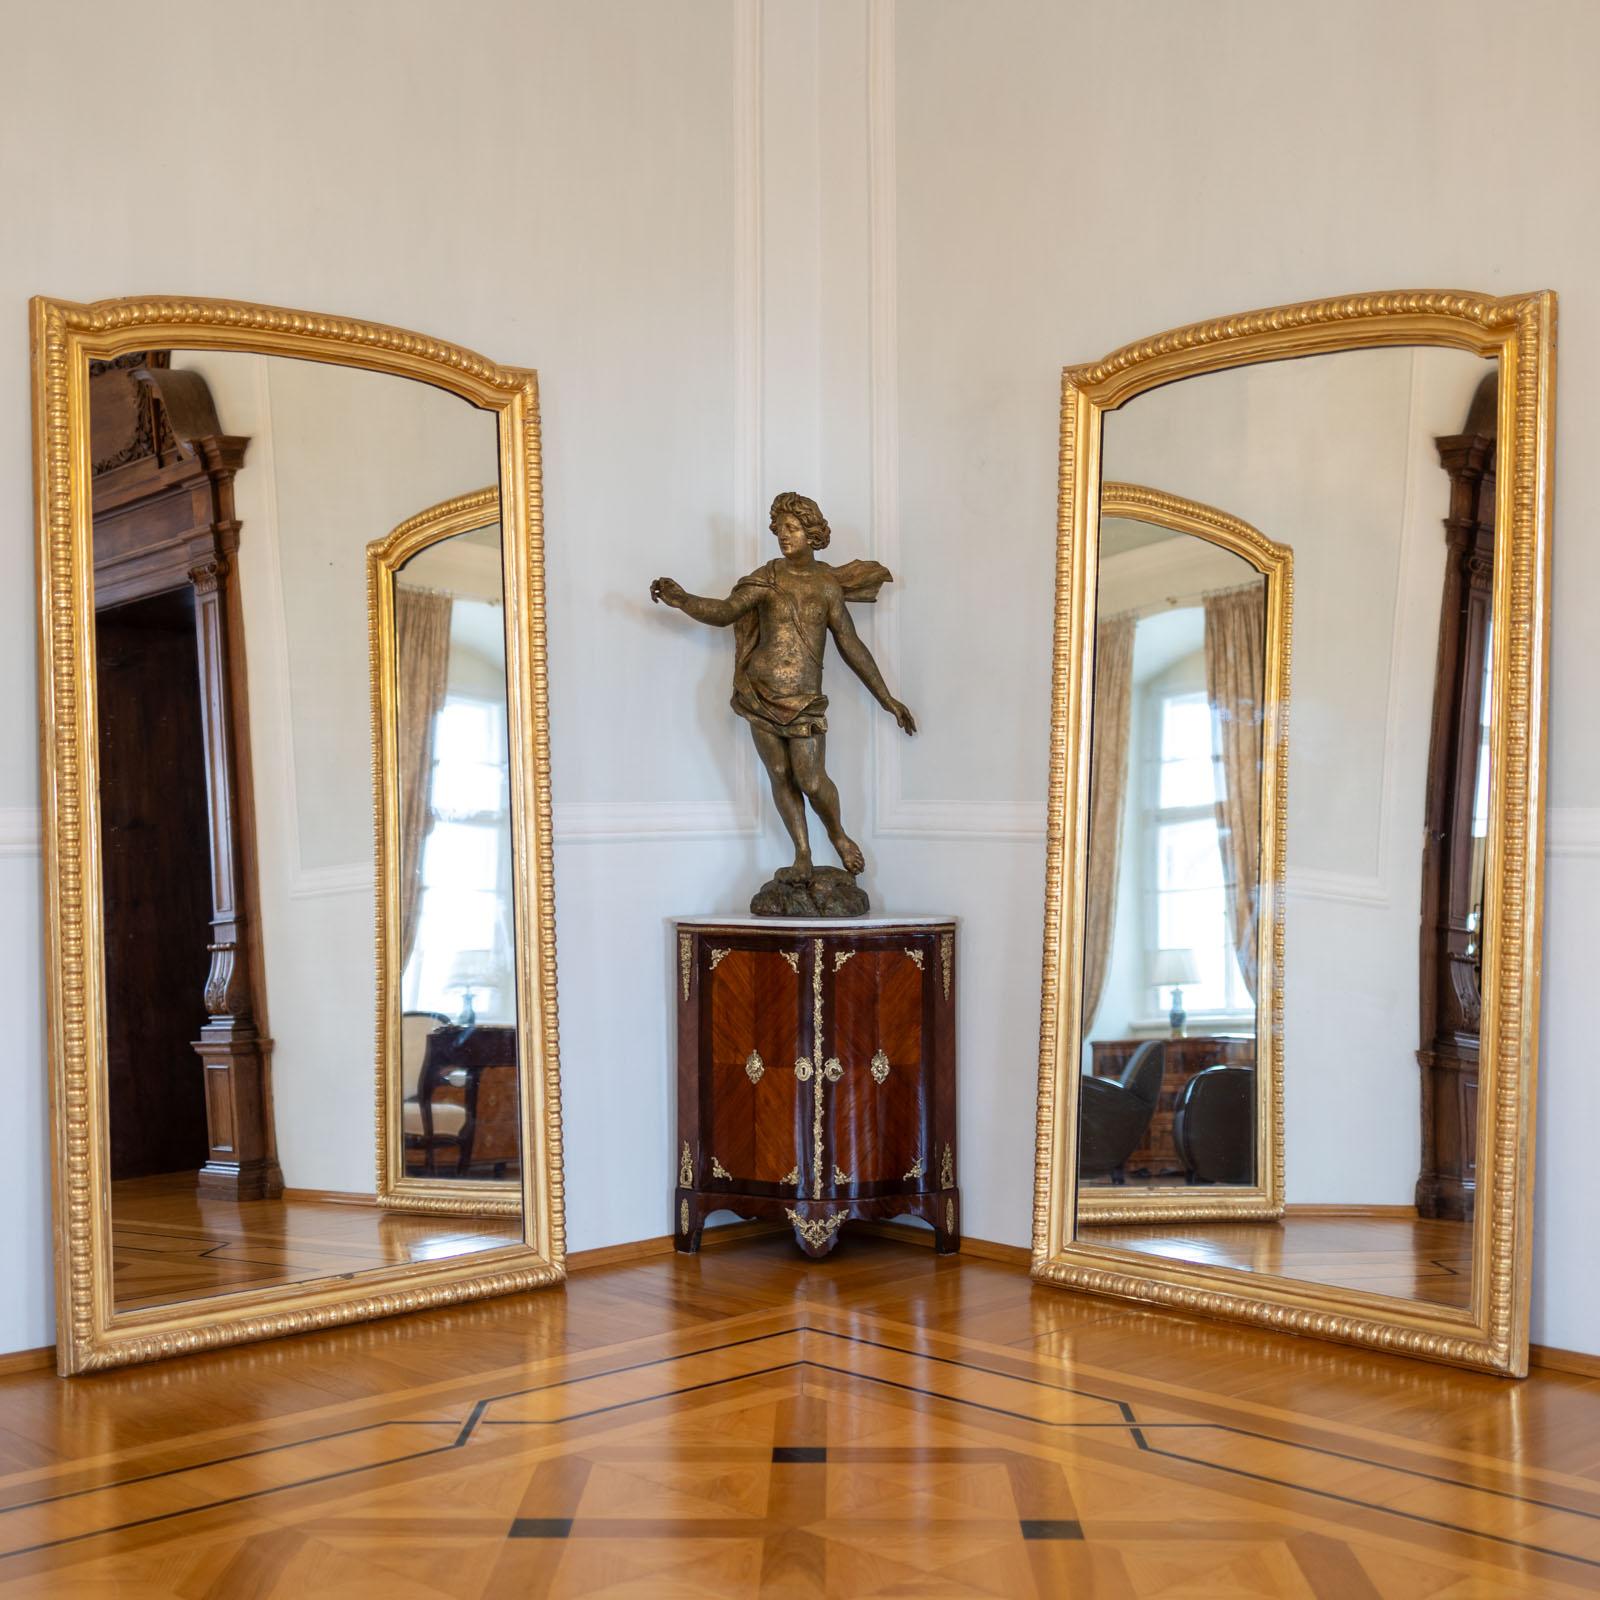 Pair of large hall mirrors in a gold-patinated frame with arched top and old mirror glass.